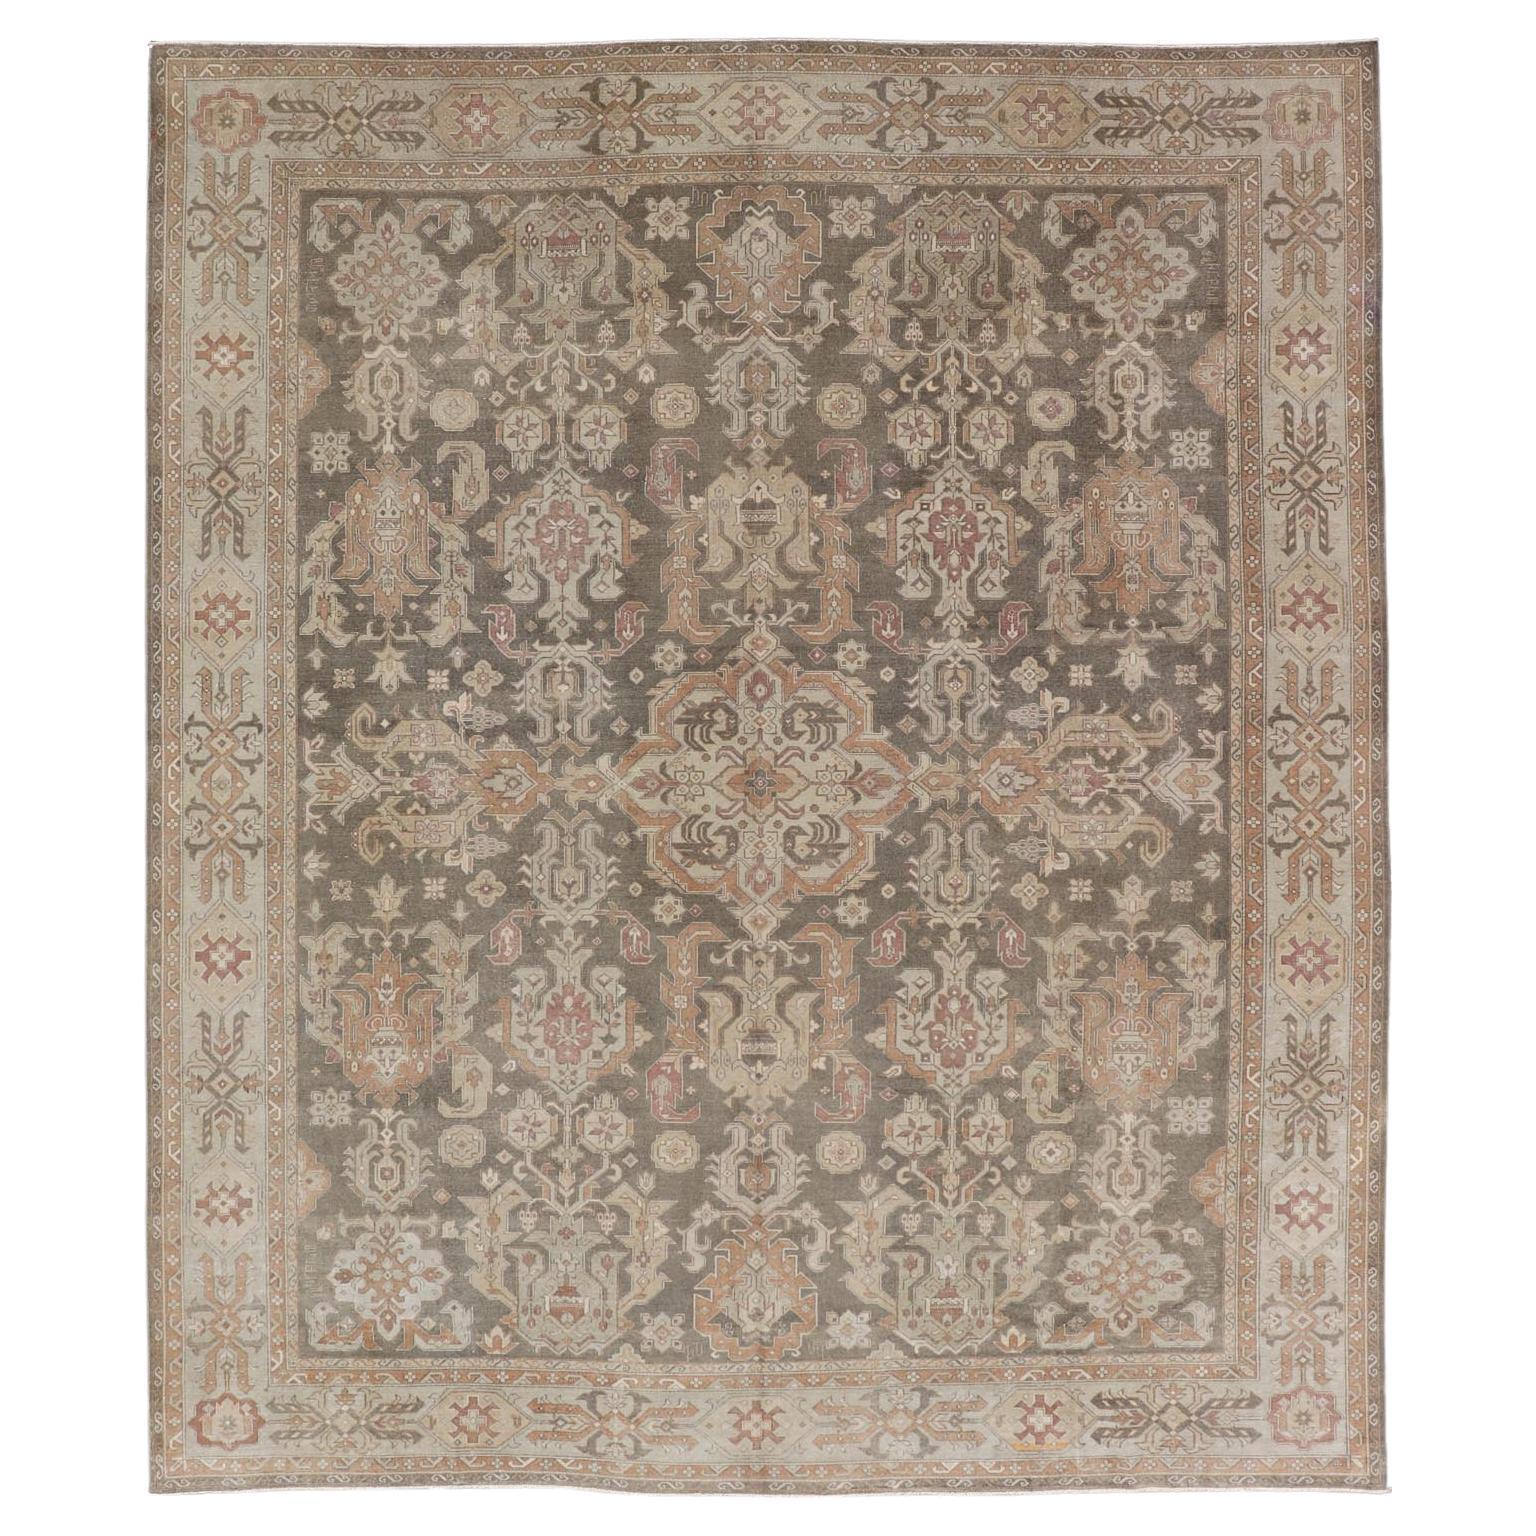 Turkish Sivas Rug with Tribal Motifs in Brownish Green, L. Green & Multi Colors For Sale